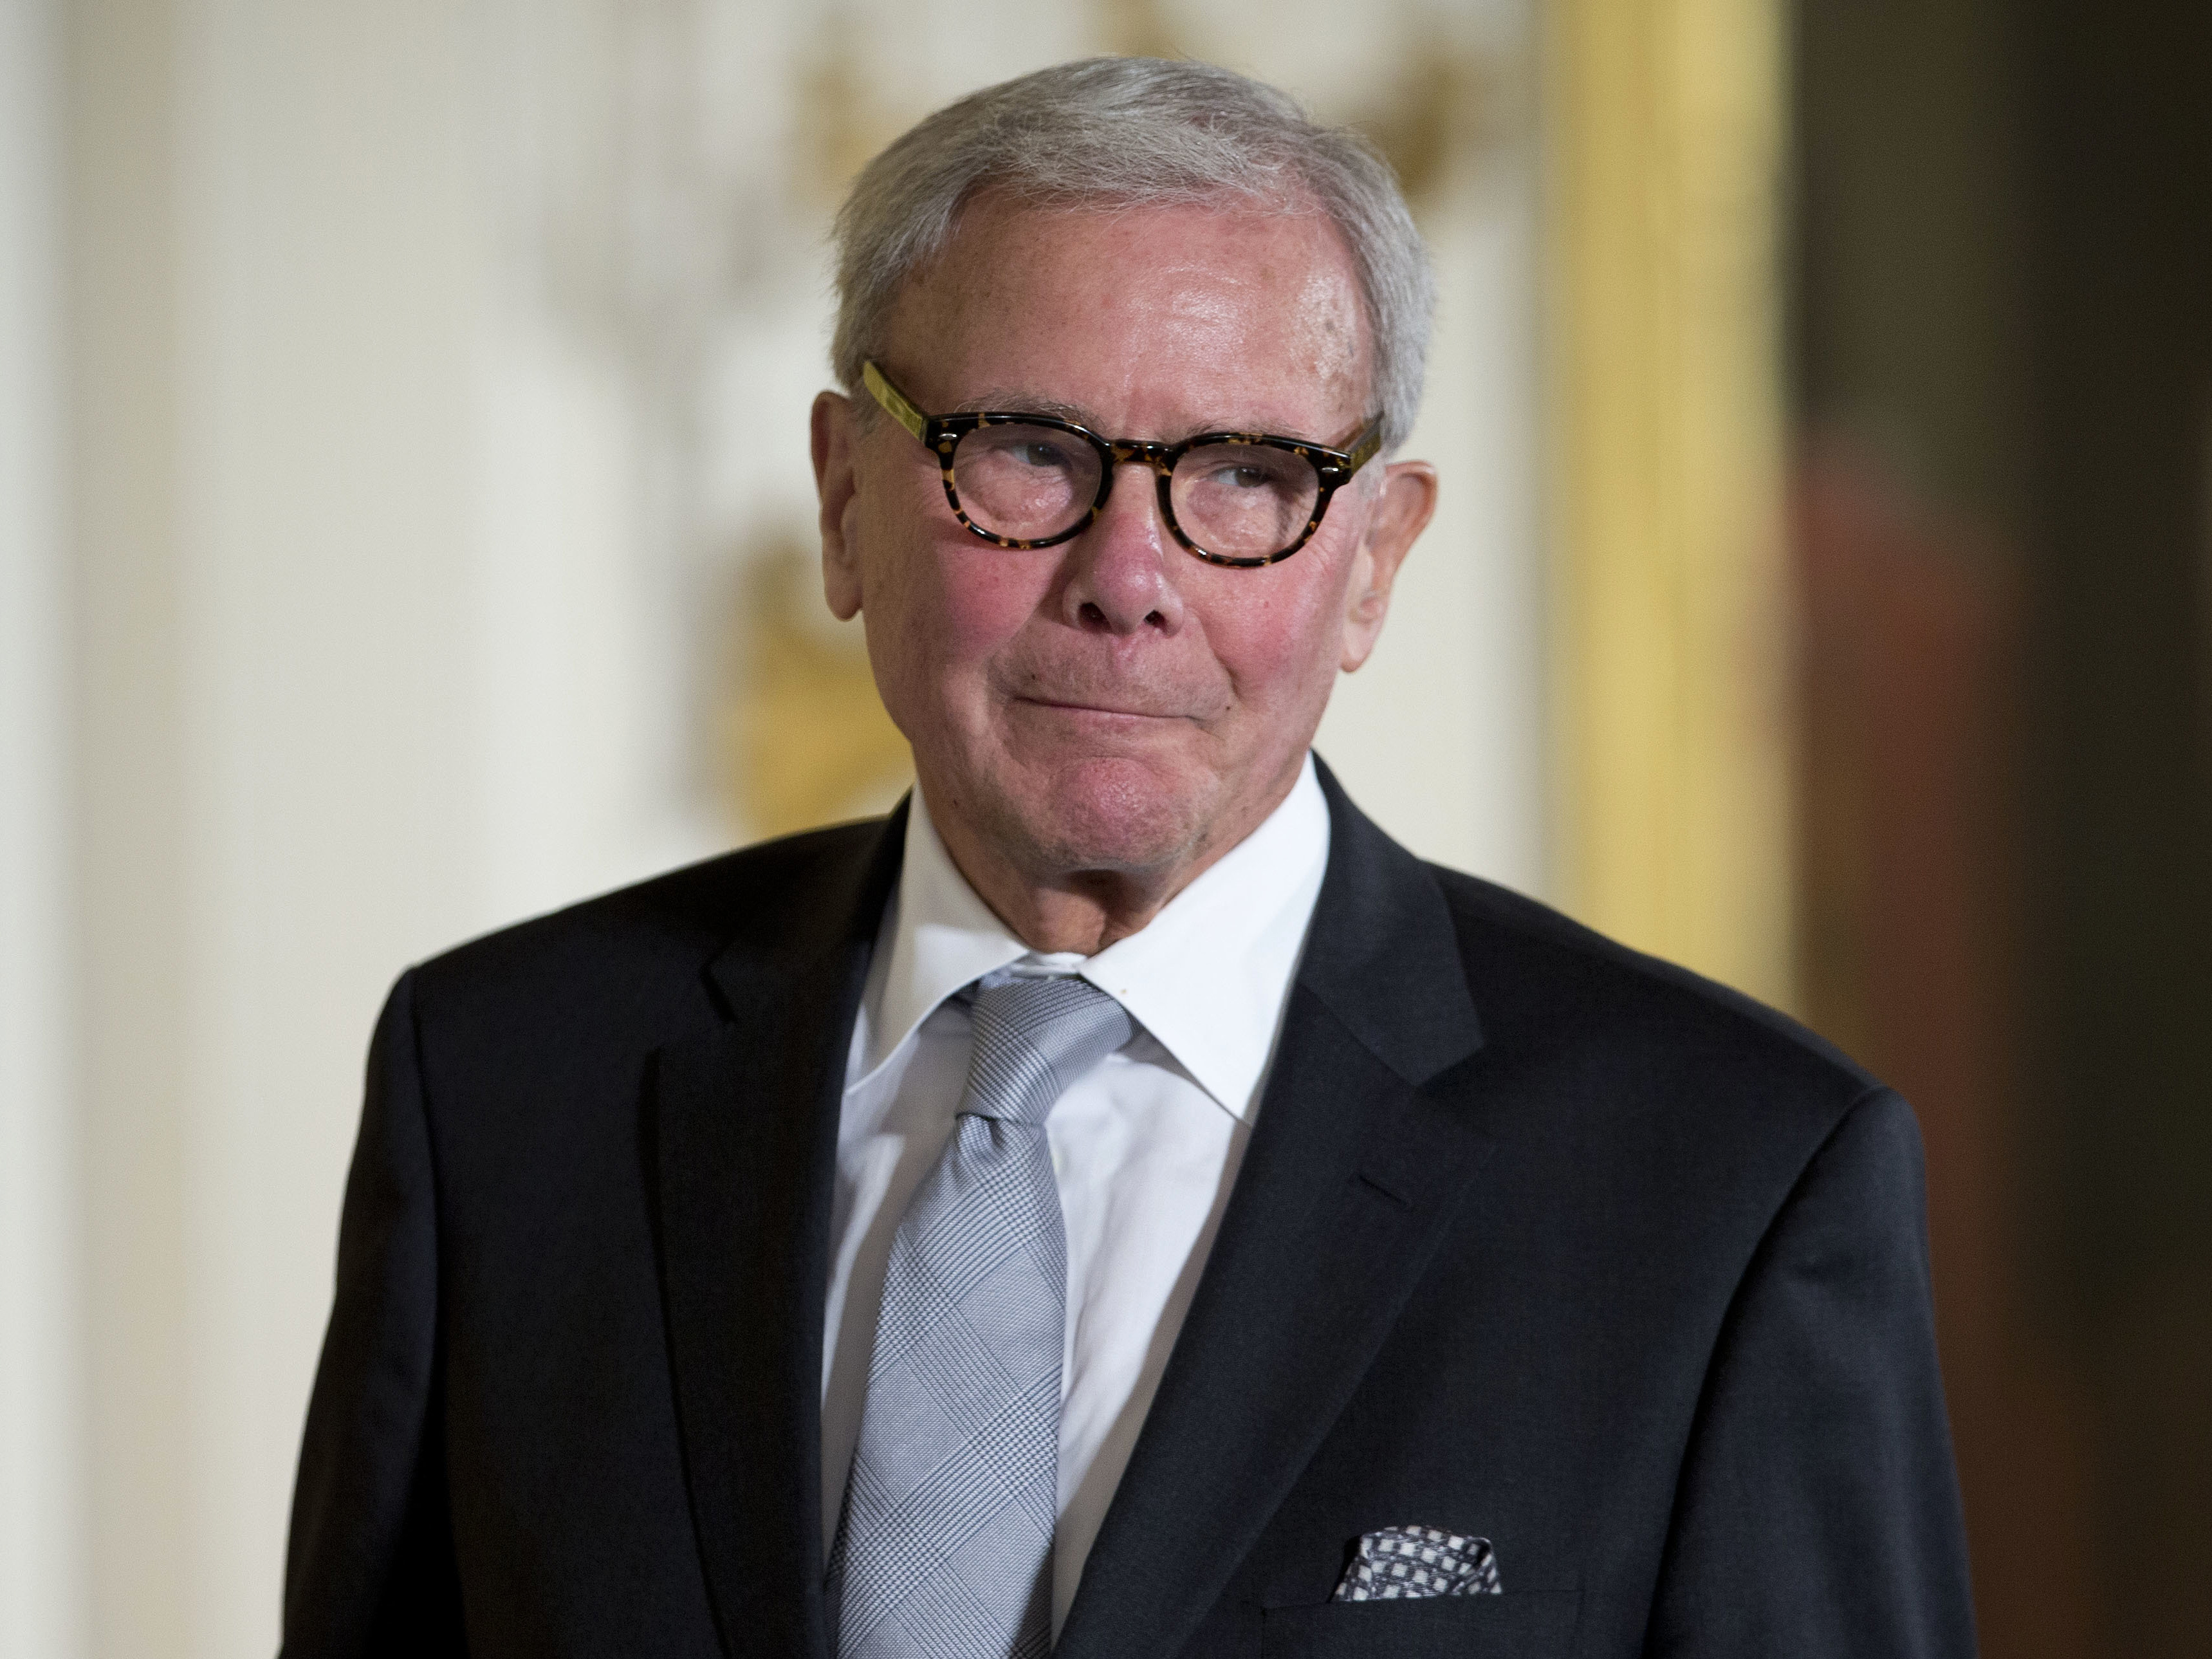 Journalist Tom Brokaw responded to the accusations: 